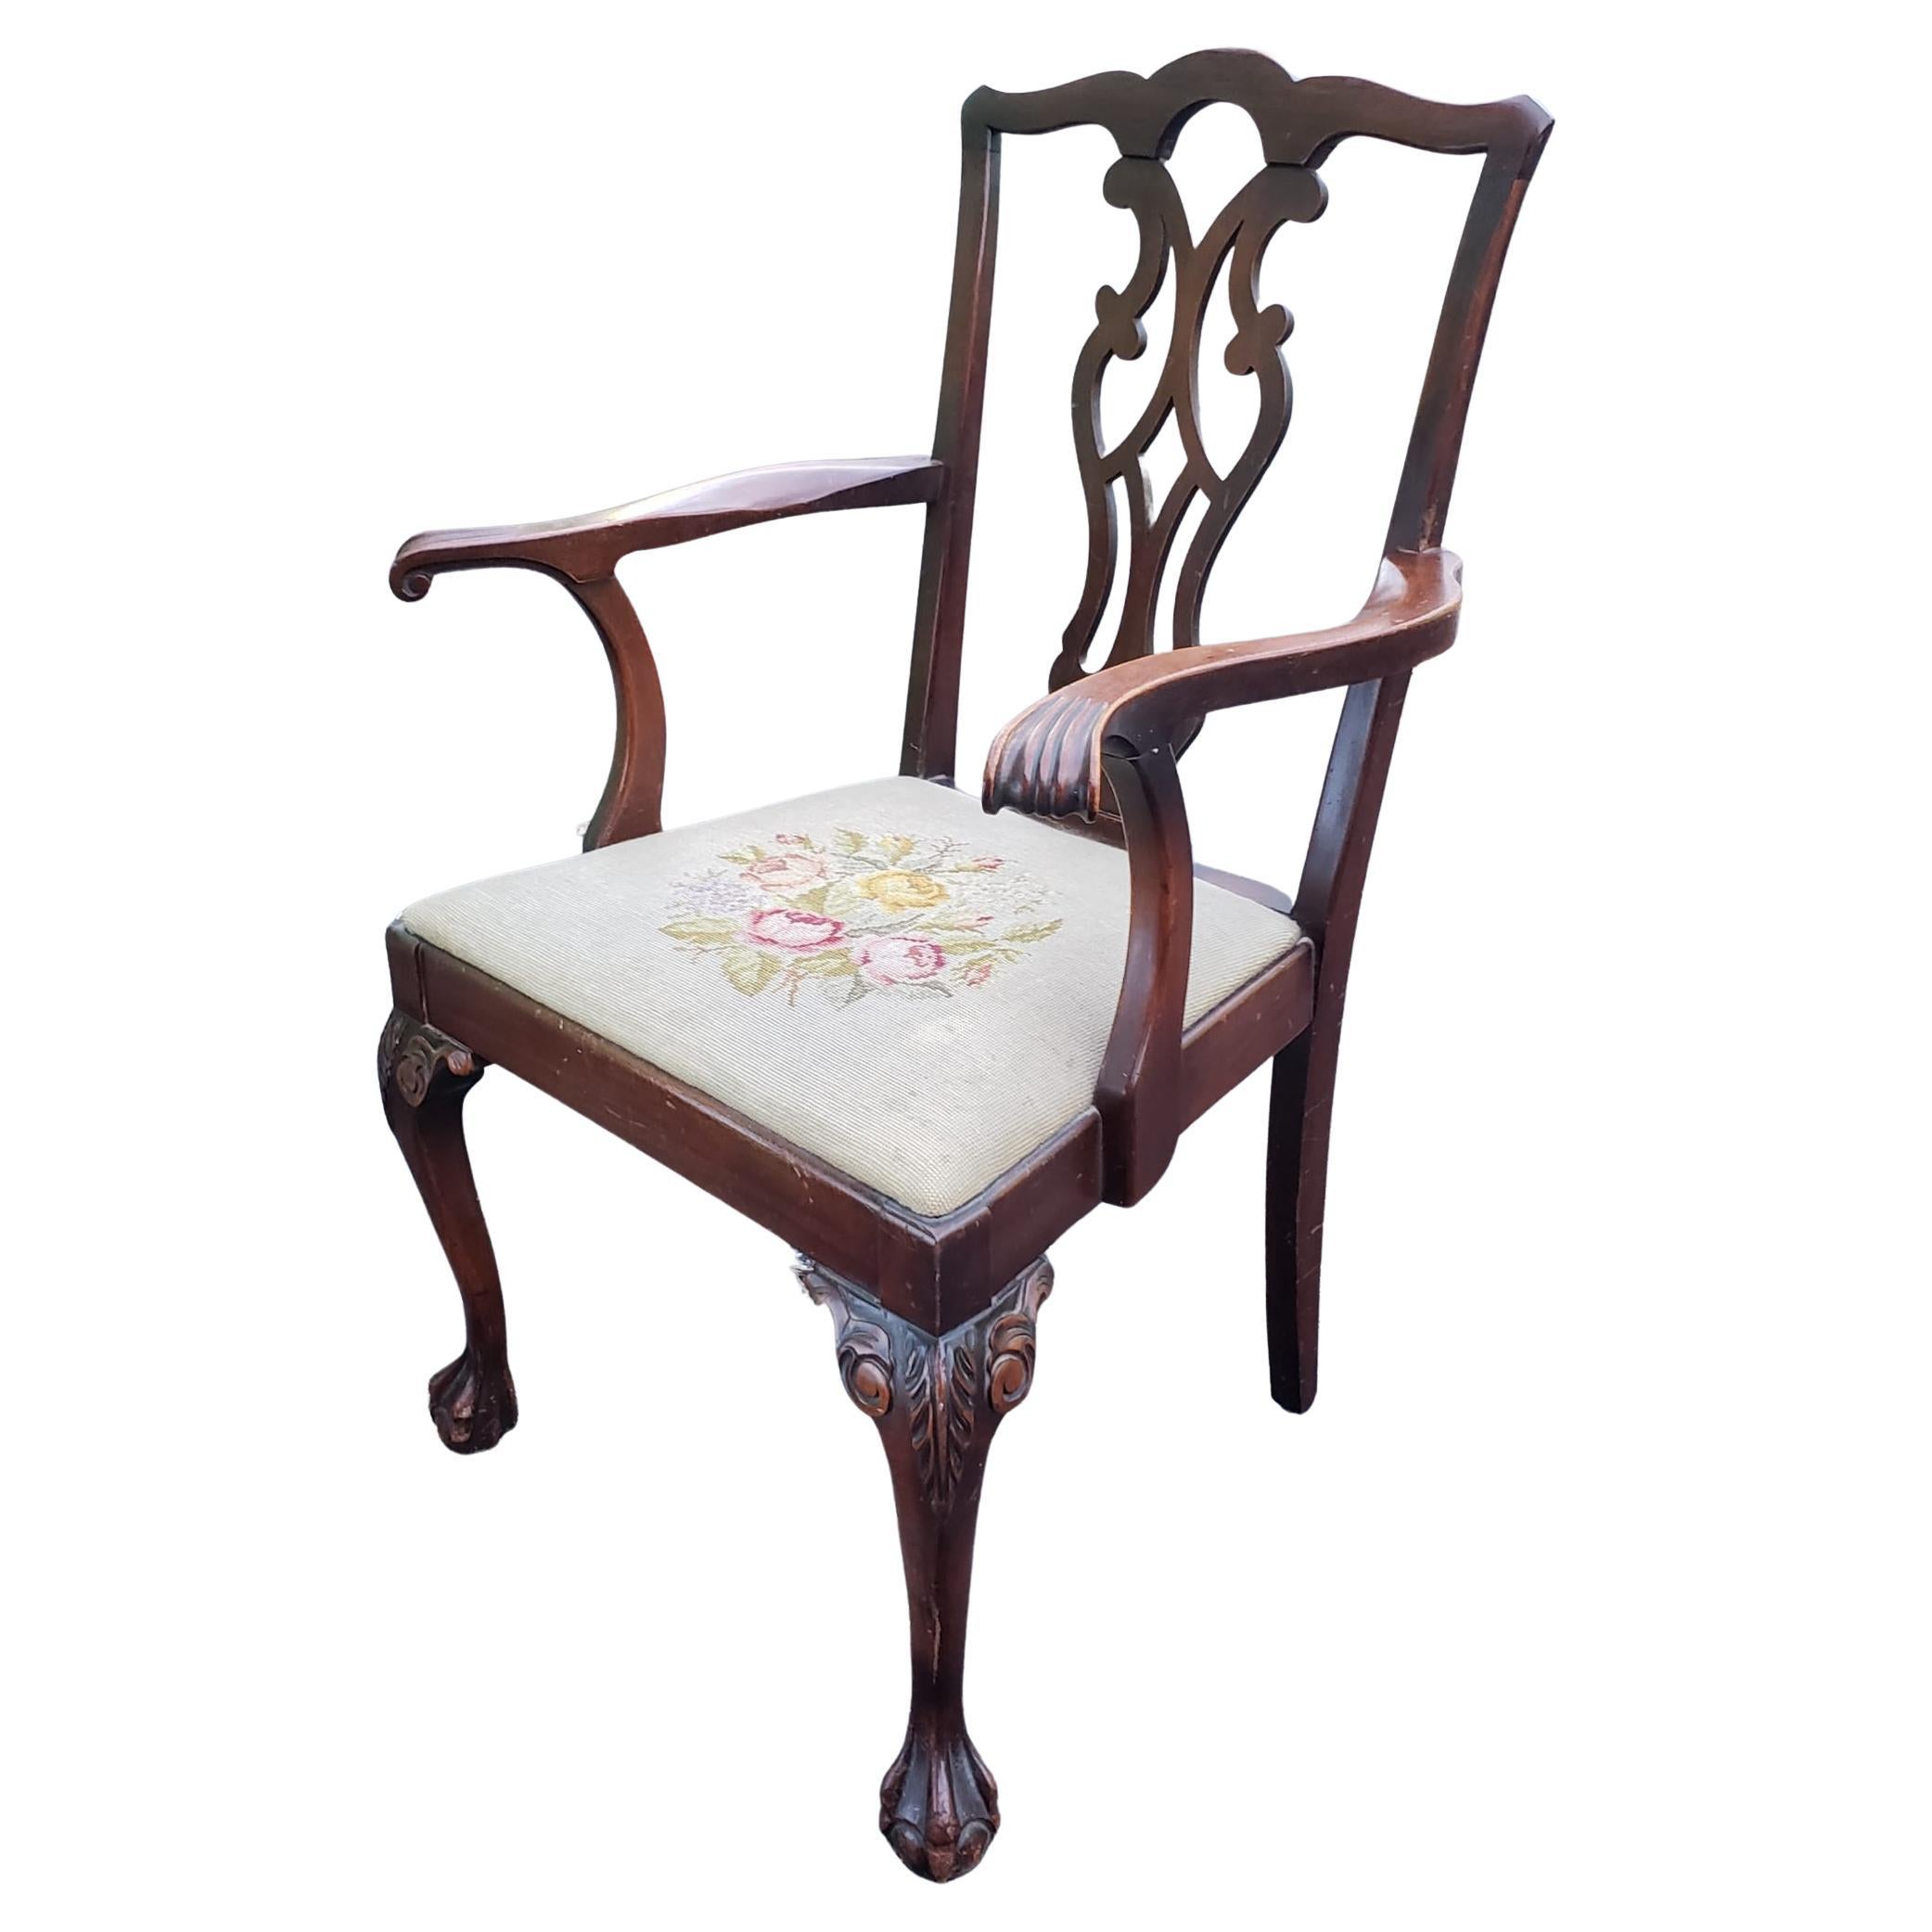 Late 19th Century Chippendale mahogany needlepoint Upholstered armchair with carved cabriole legs terminating with ball and claw feet. Measures 26